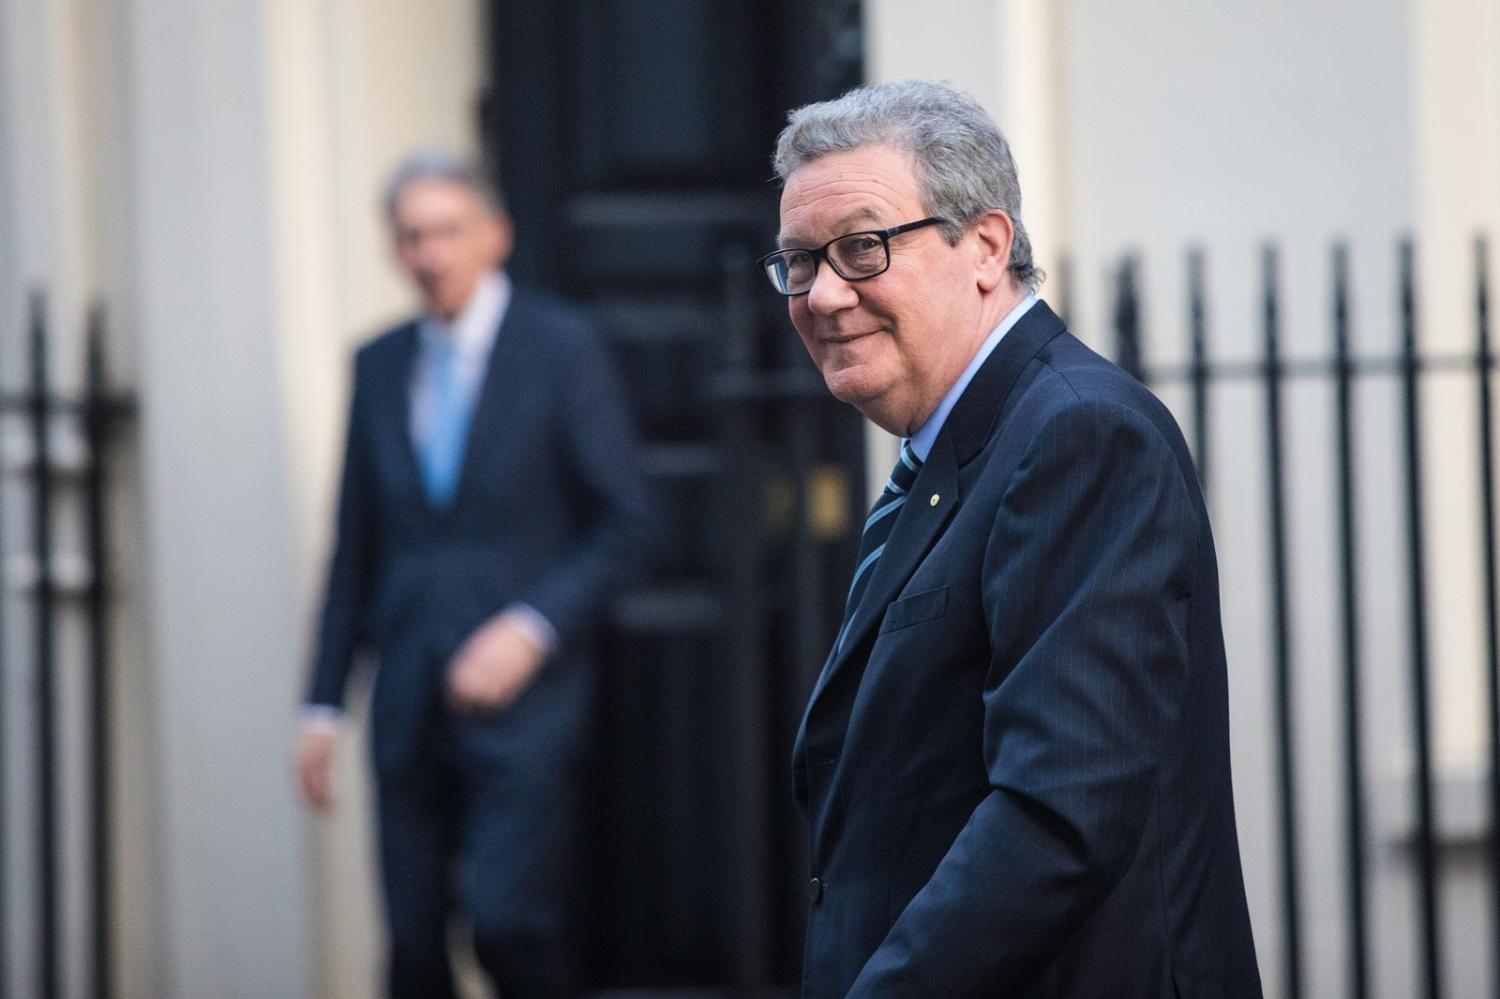 Australian High Commissioner to the United Kingdom Alexander Downer at Number 11 Downing Street, 24 January 2017 (Jack Taylor/Getty Images)